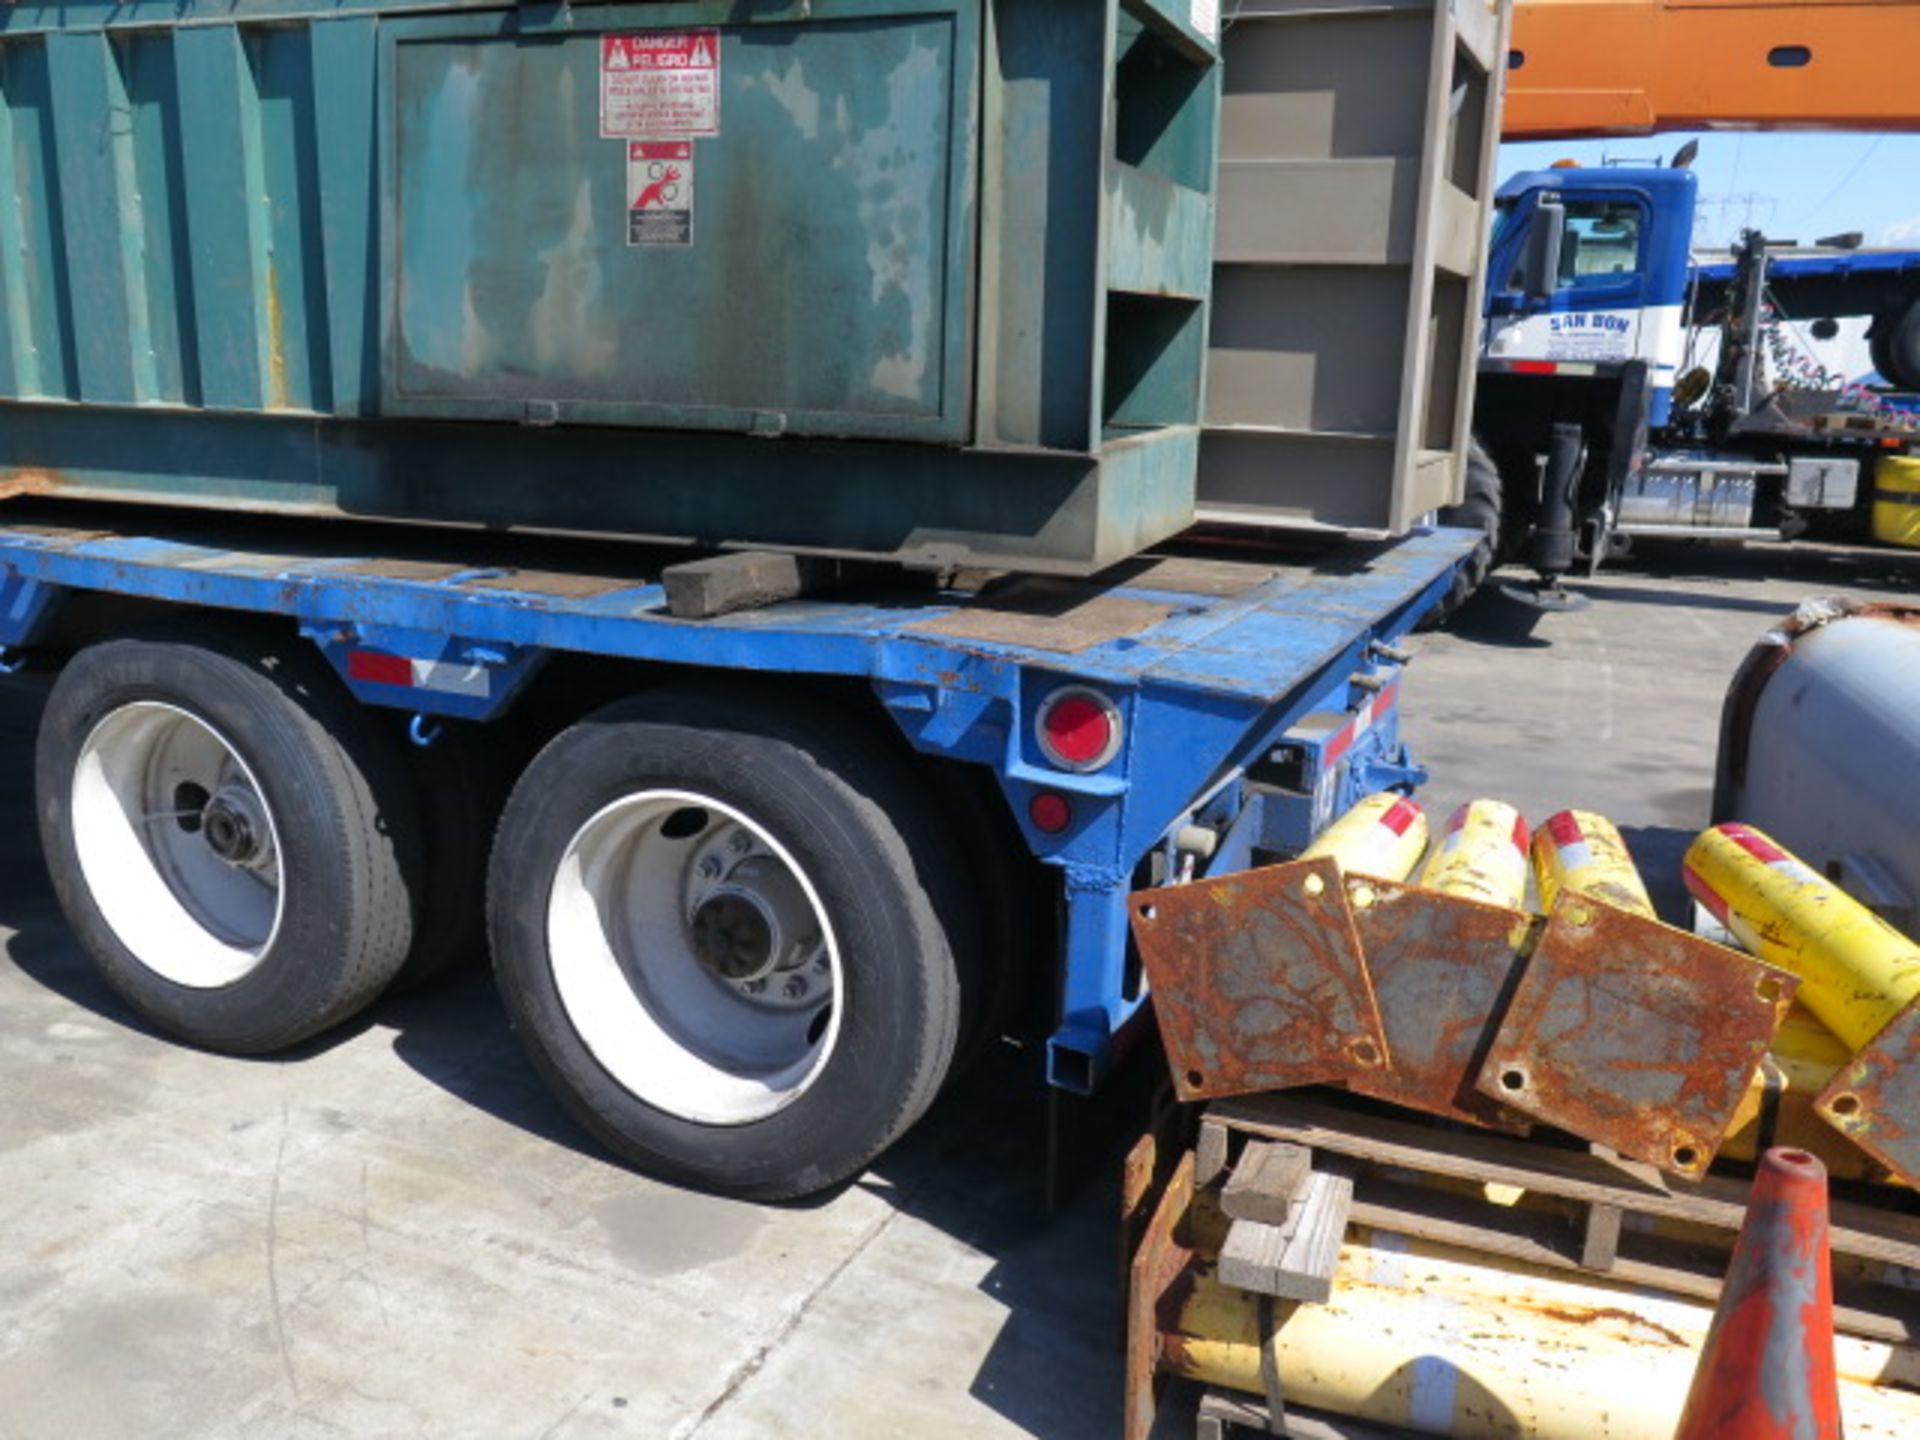 Drop-Deck Trailer Lisc 4KU8502 (SOLD AS-IS - NO WARRANTY) - Image 8 of 16